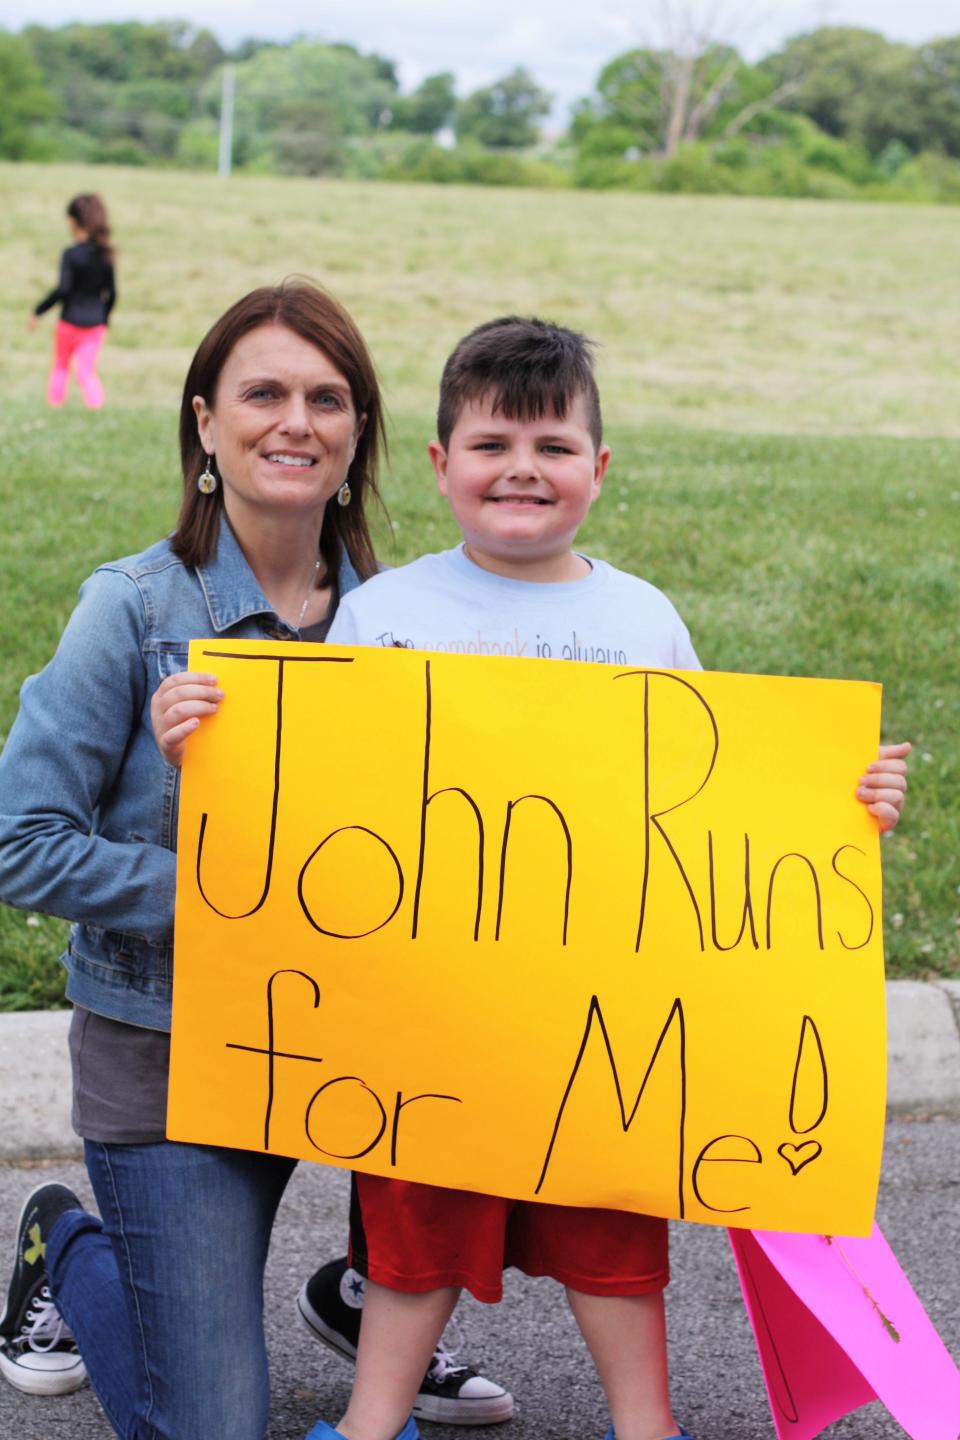 Martha Sileno, with her son Noah, who is now in remission from cancer. Sileno and her son started Noah Nation Foundation, which collects pajamas and has them adapted for children undergoing cancer treatment. May 30, 2021.